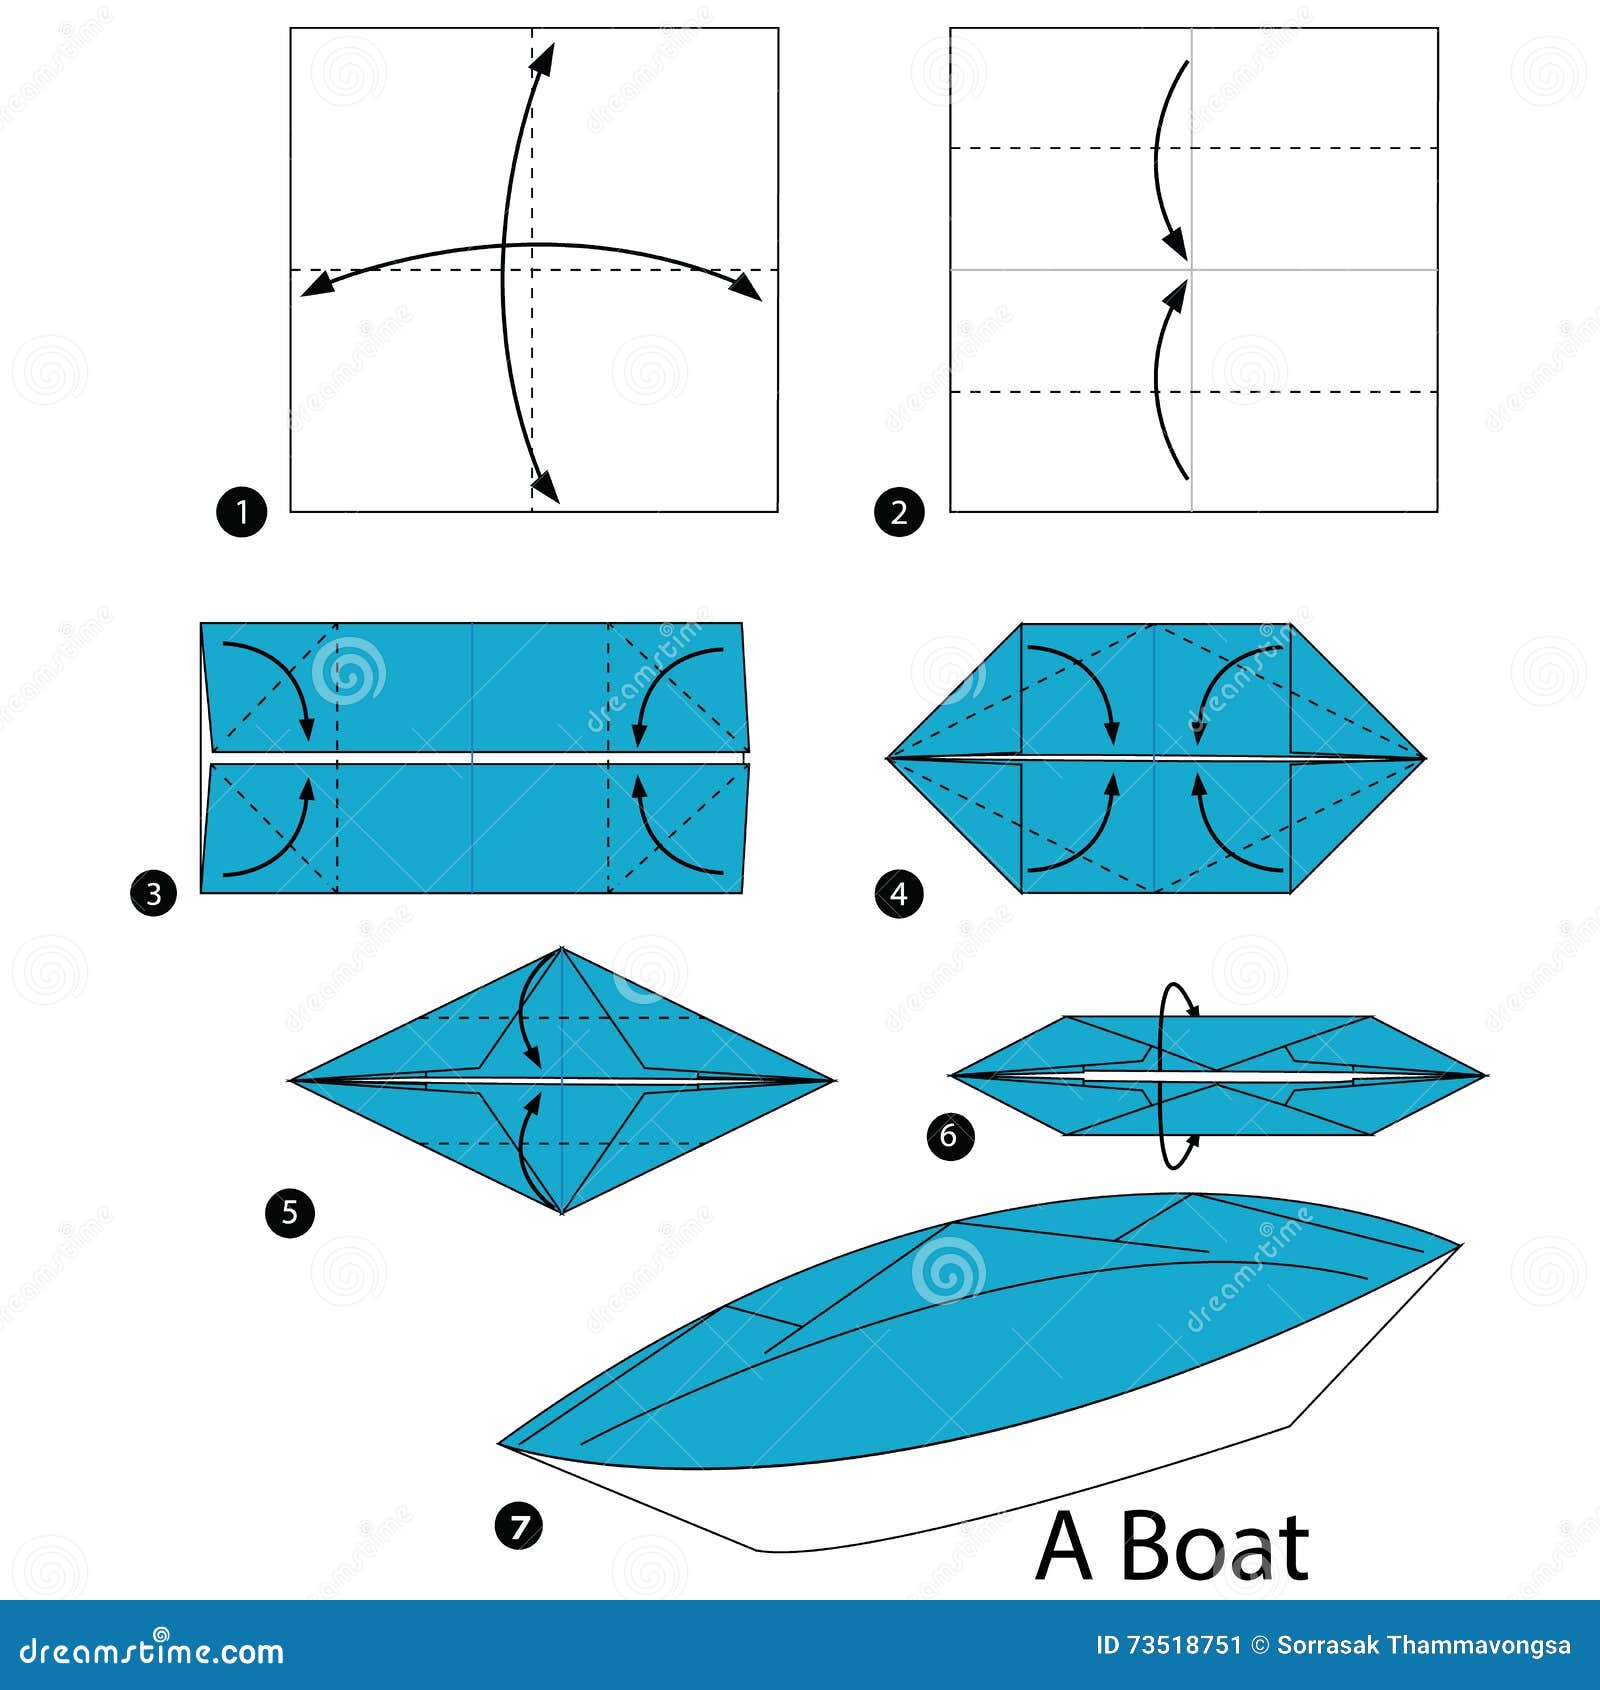 topic how do you make a paper sailboat ~ easy build